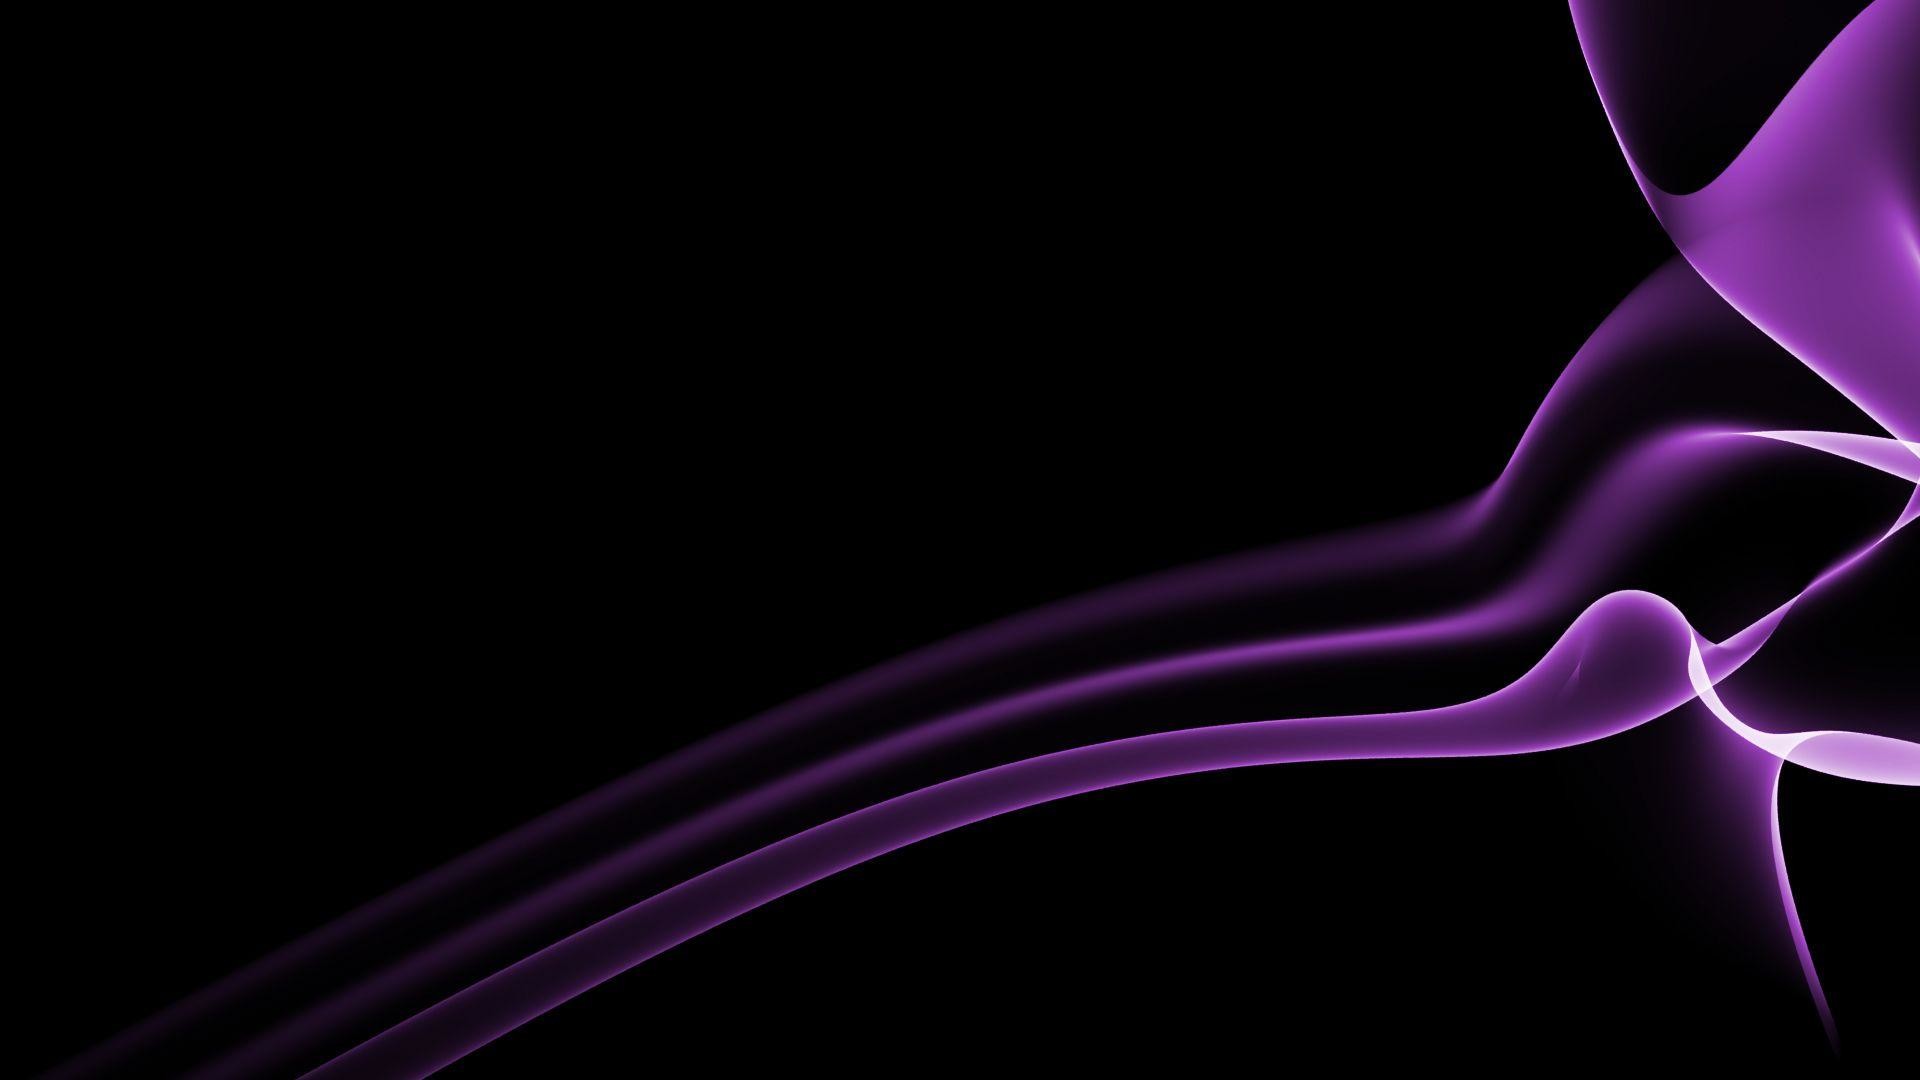 1920x1080 Wallpapers For > Dark Purple And Black Backgrounds